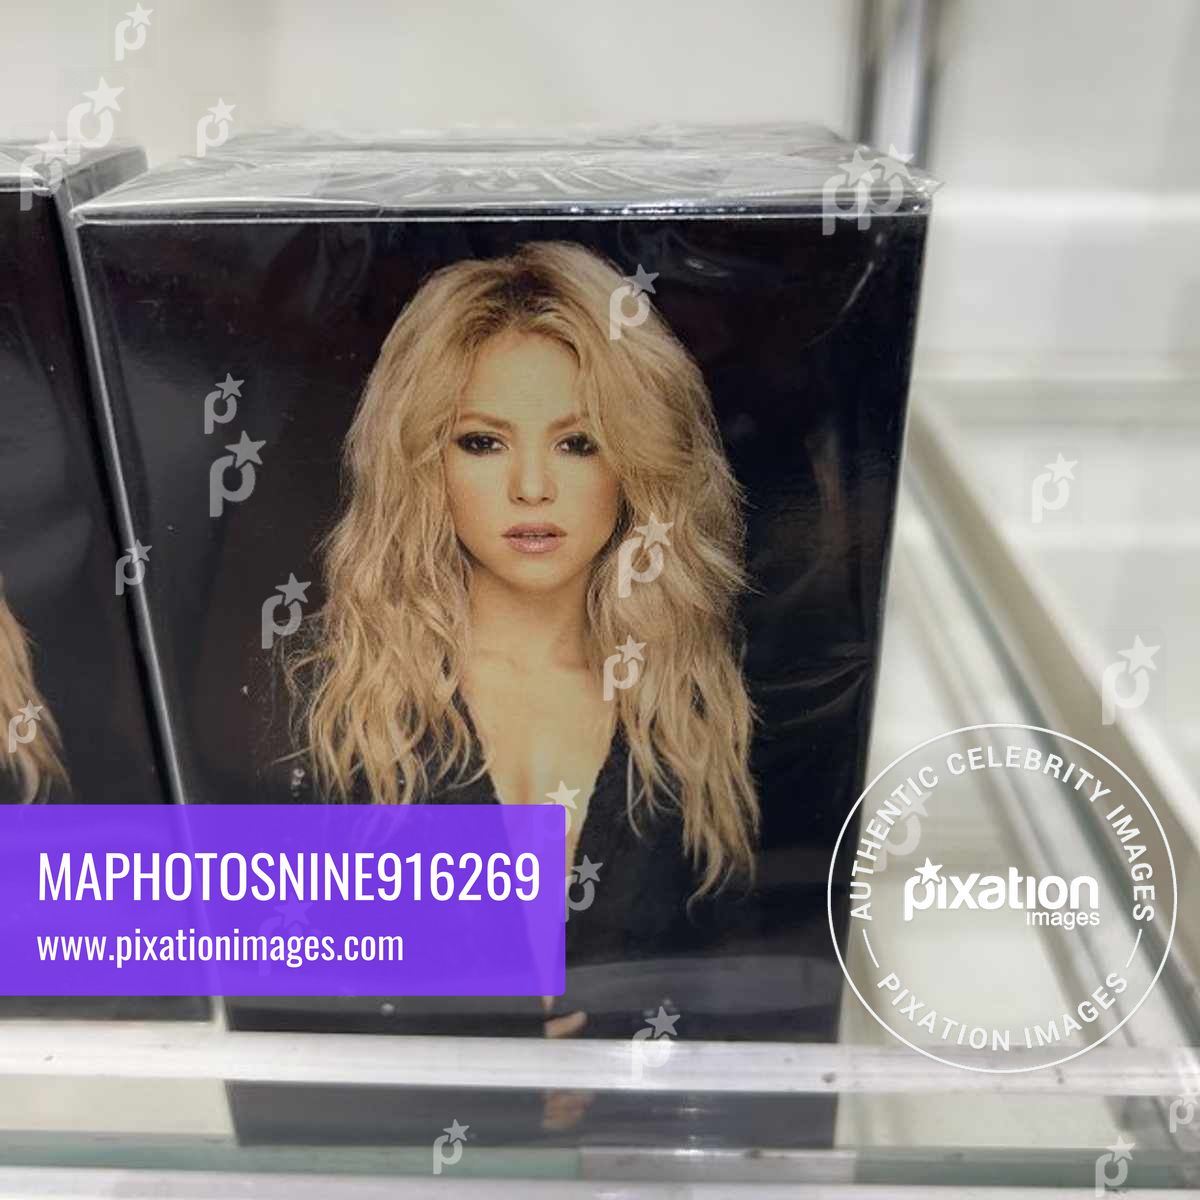 Shakira Rock perfume for sale at the airport in Marrakech Morocco